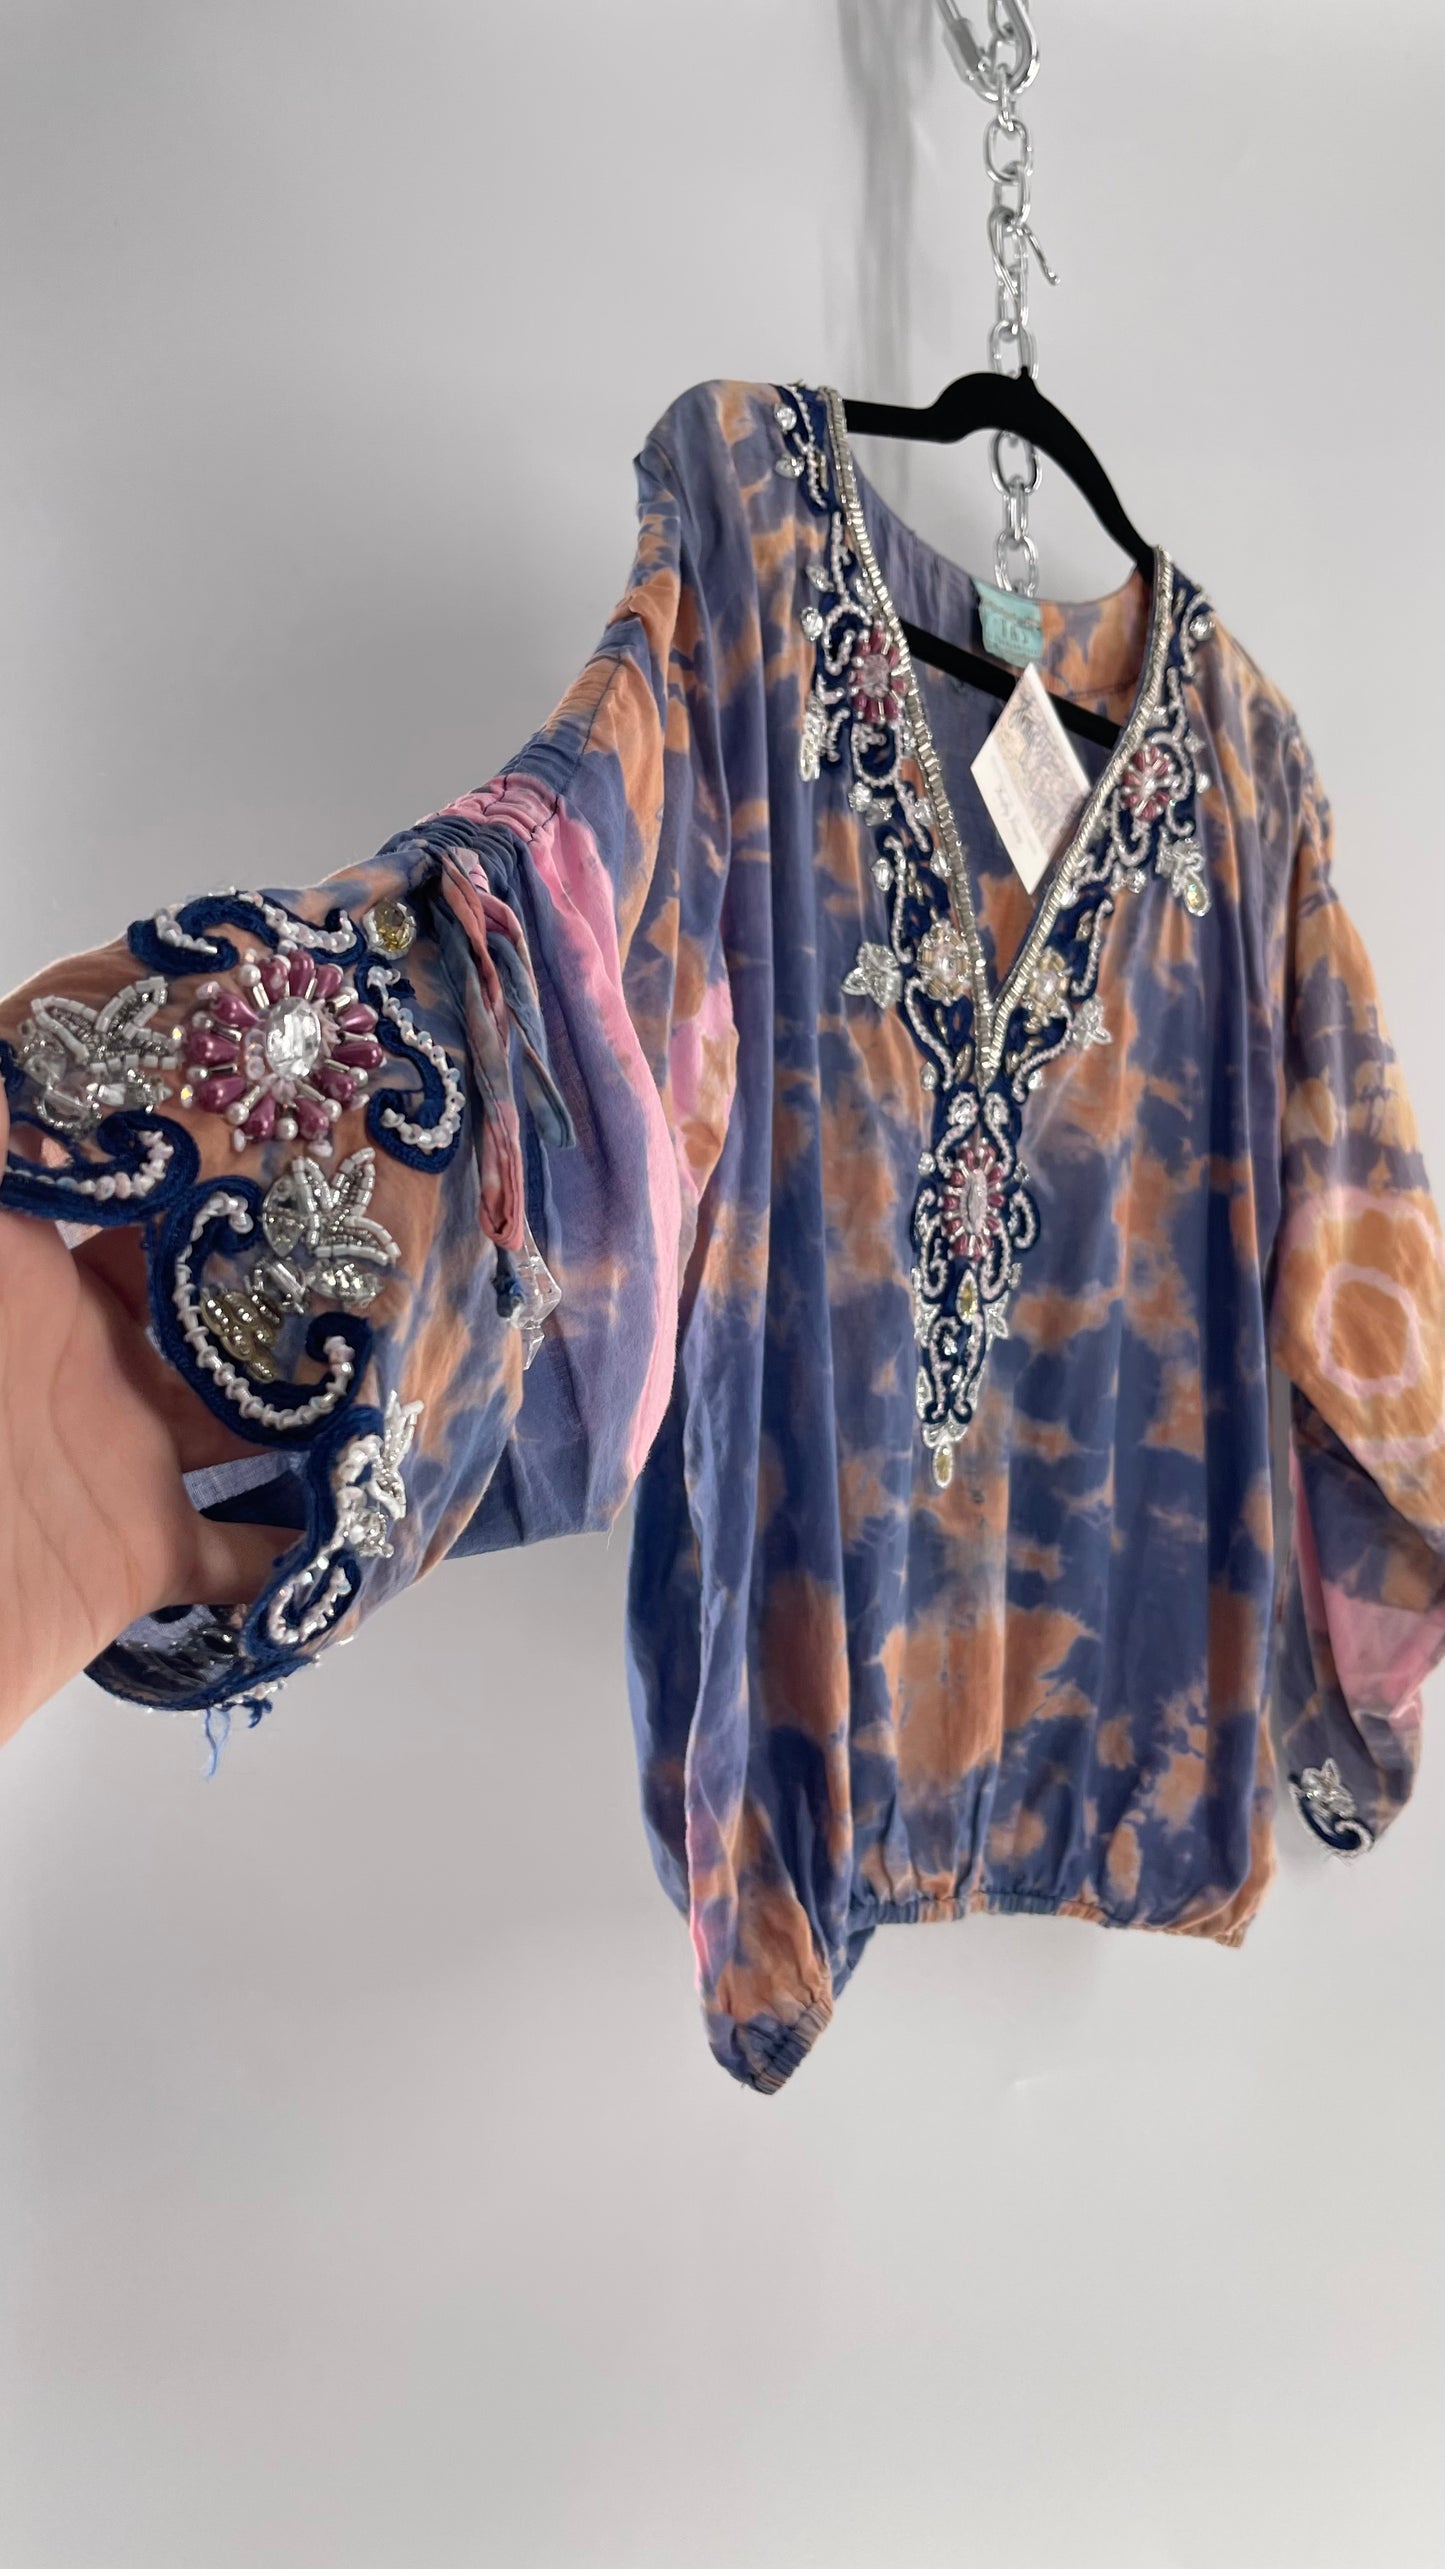 TAJ by Sabrina Crippa Tie Dye Blouse with Gemstone Encrusted Neckline and Ruched Beaded Sleeves (S/M)